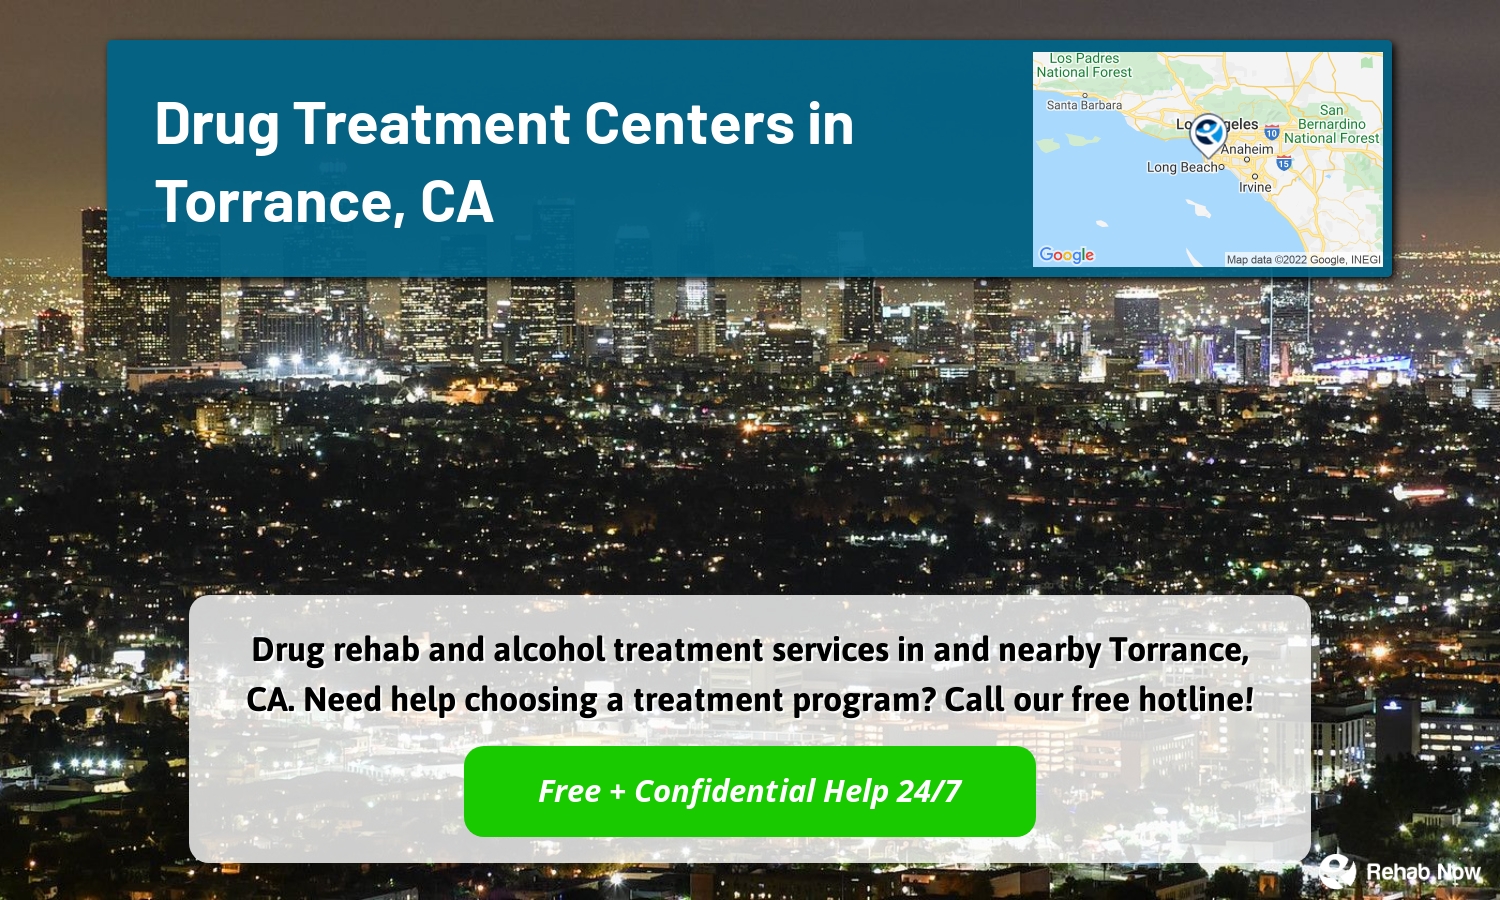 Drug rehab and alcohol treatment services in and nearby Torrance, CA. Need help choosing a treatment program? Call our free hotline!